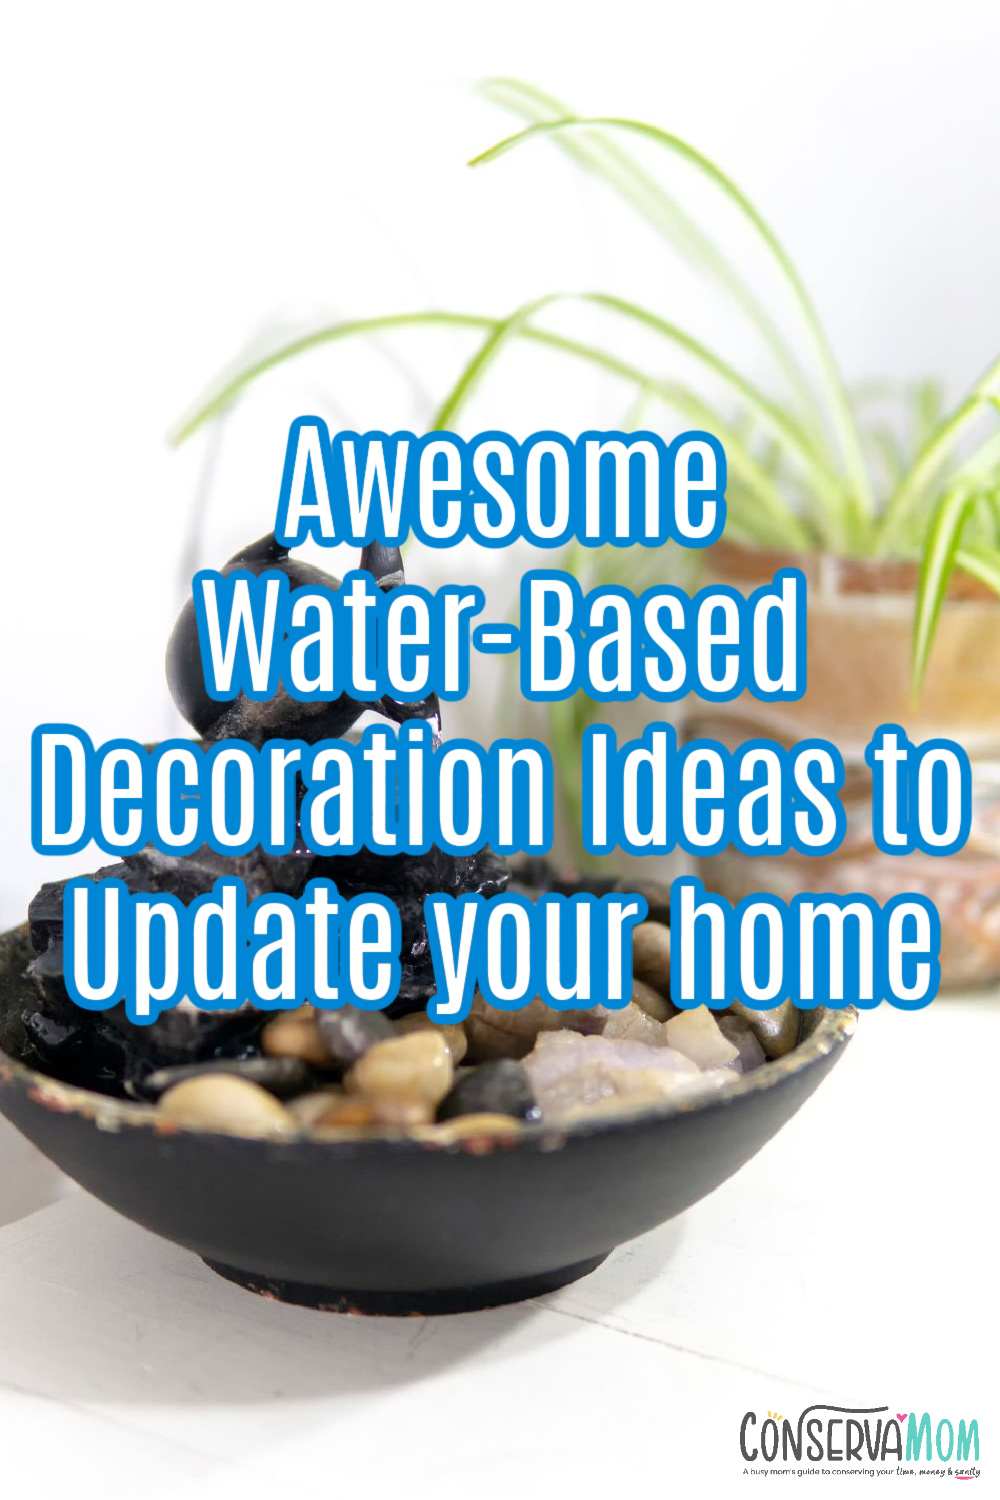 Awesome Water-Based Decoration Ideas to Update your home (2)